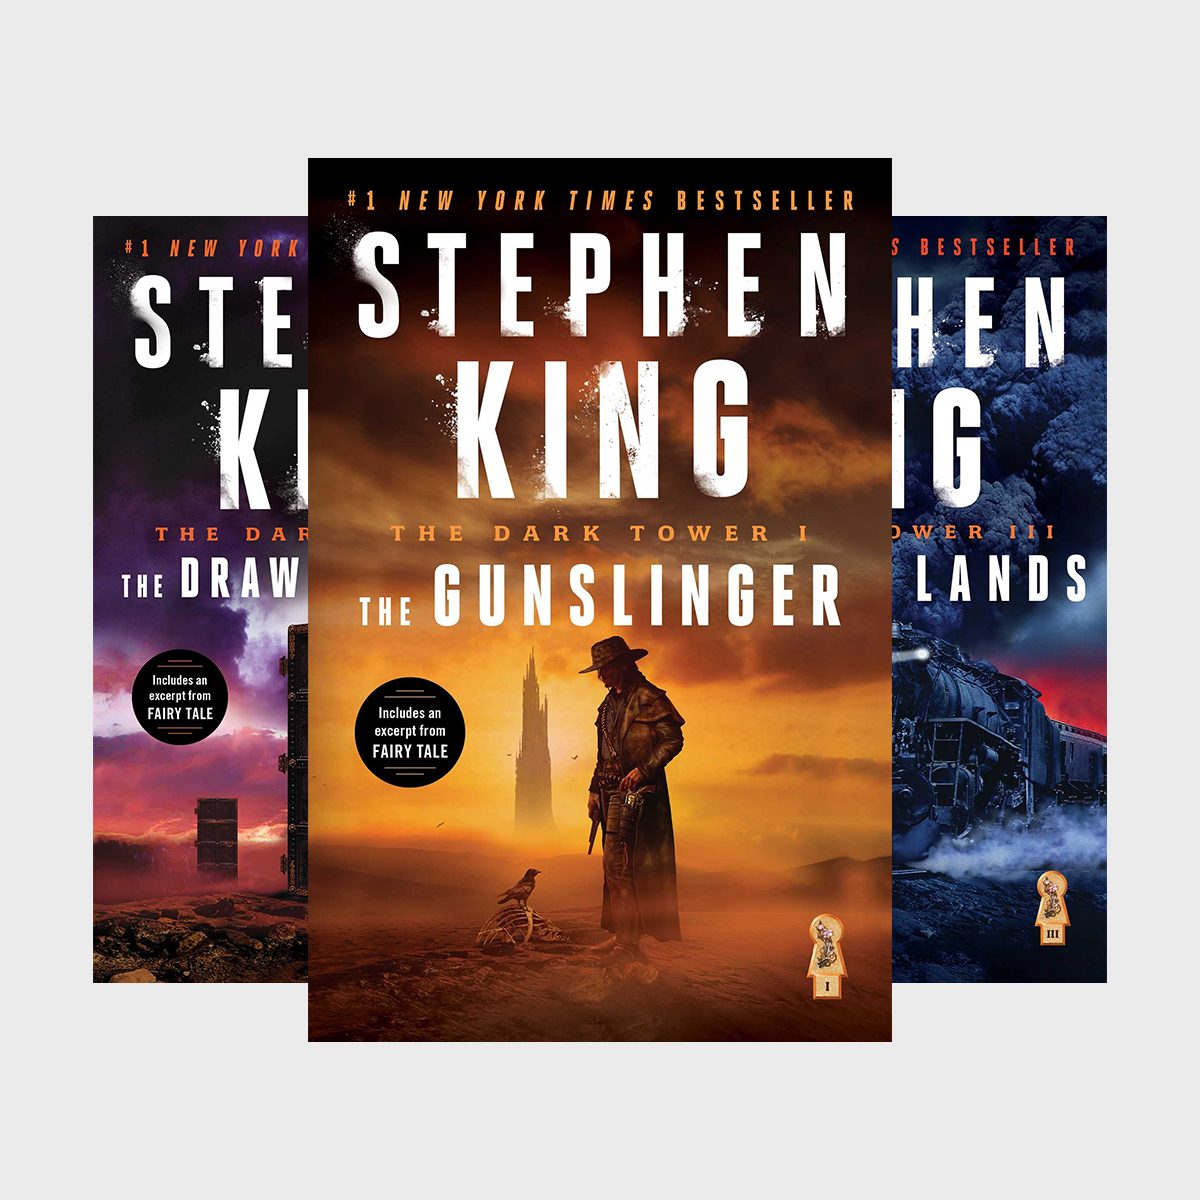 44 Completed Book Series Guaranteed to Keep You Reading